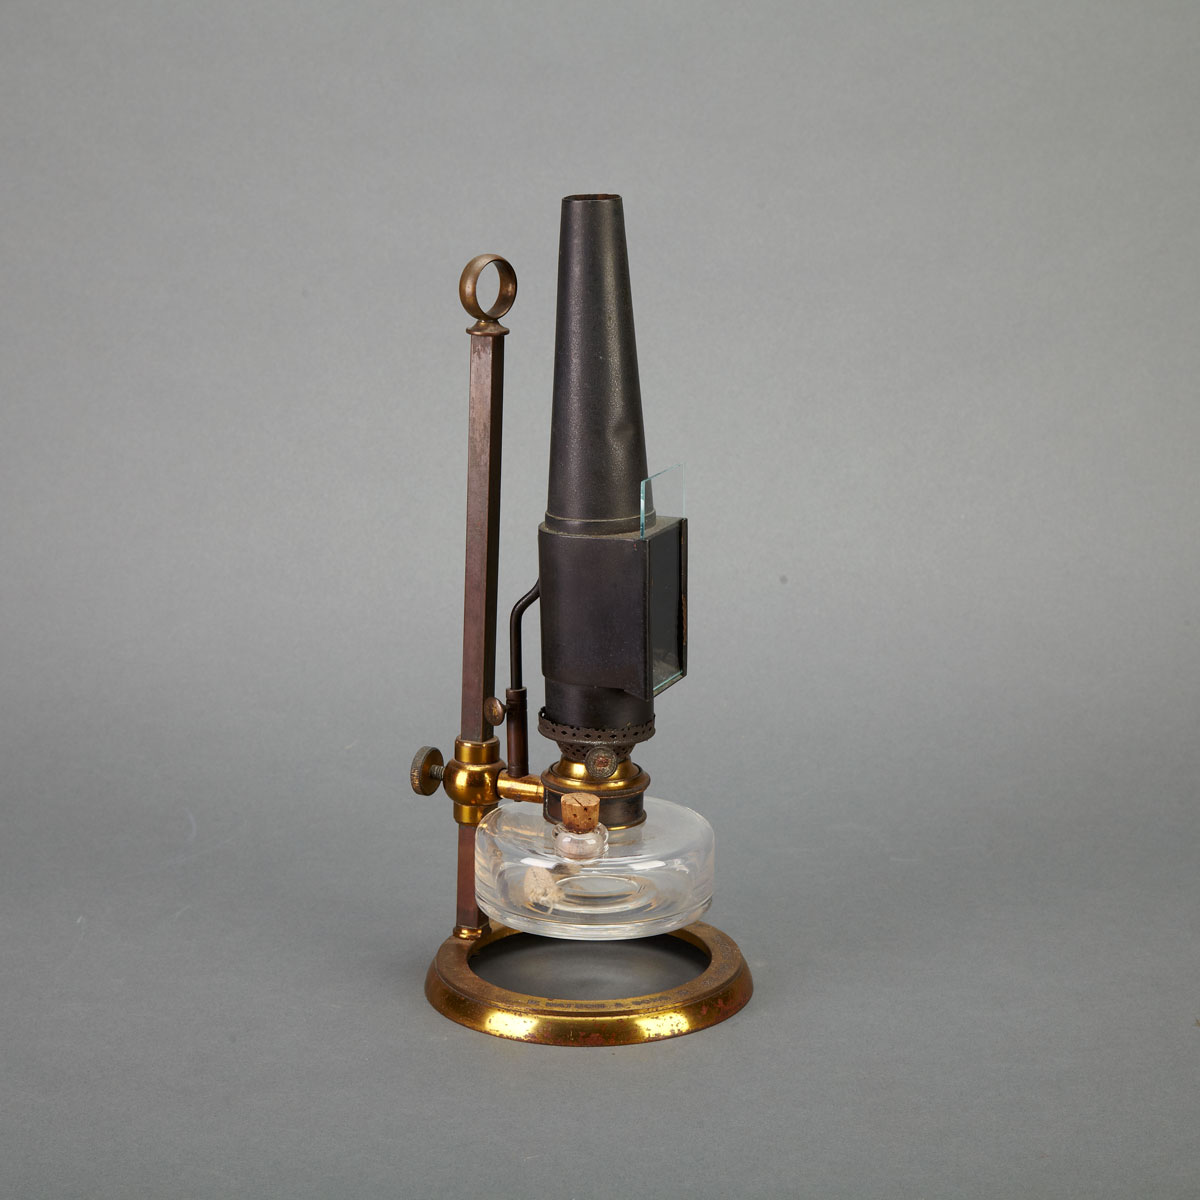 English Lacquered Brass Microscopy 17a205